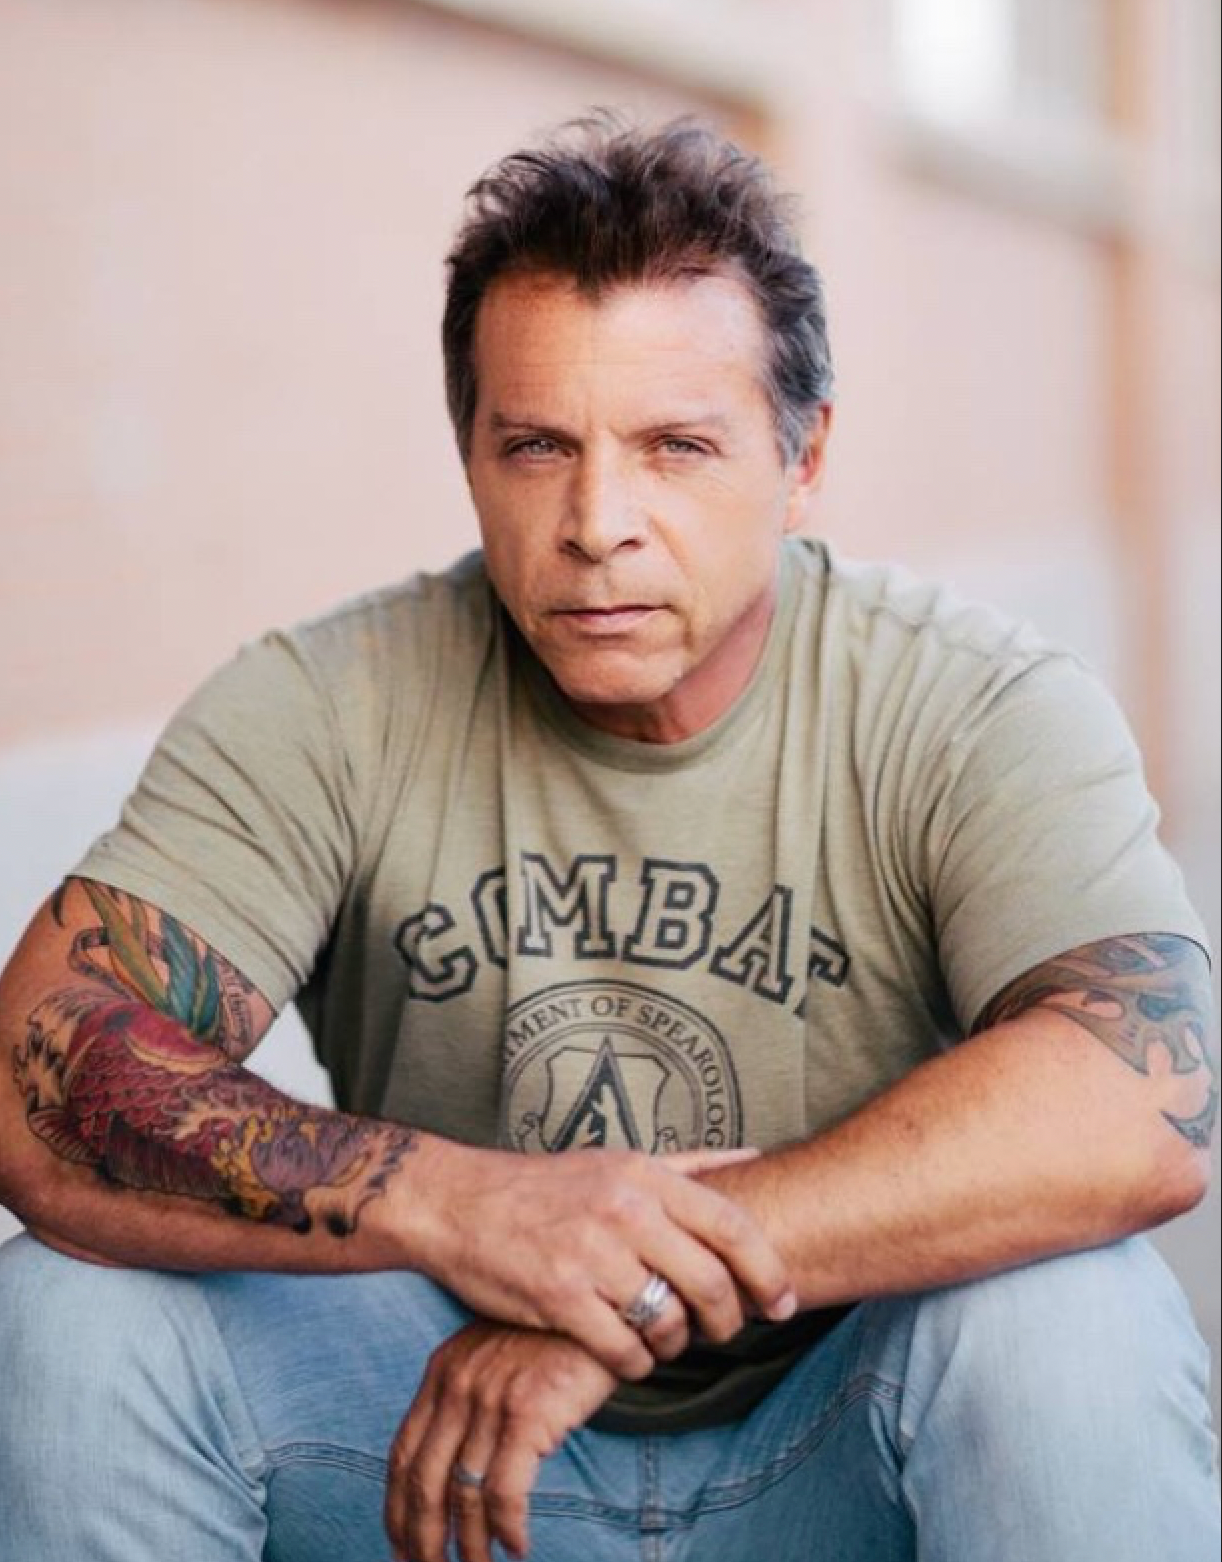 We spoke with coach Tony Blauer about mindset, recovery, and the power of fear.